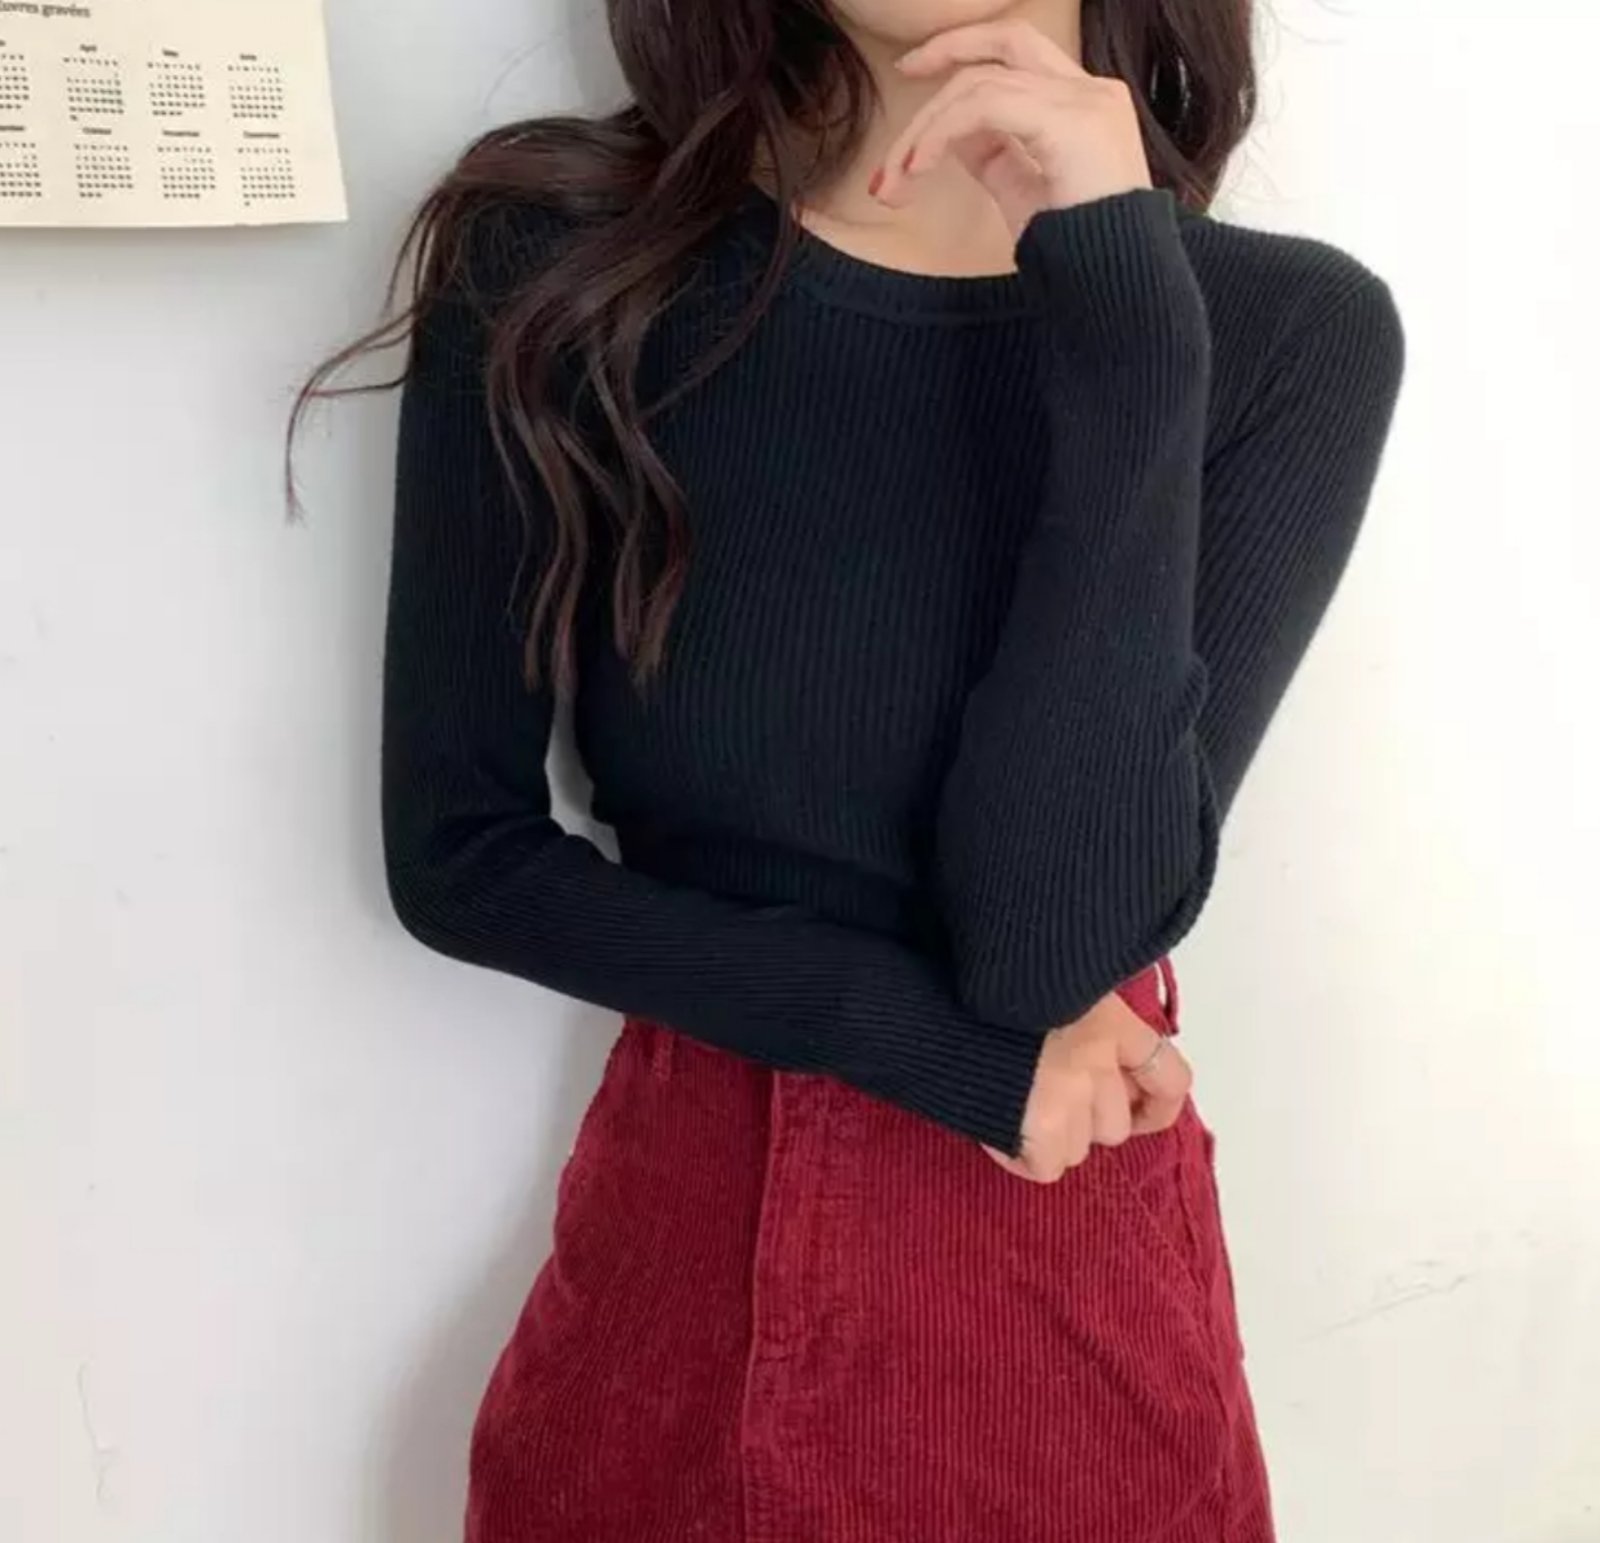 <p>I am looking for&nbsp;women&#39;s clothing: sweaters, blouses, cardigans, vests, jeans, etc. I want to buy in bulk. I am looking for honest, decent, reliable suppliers who are interested in working on a long-term basis. Thanks for your attention! Purchase volume: from 50-300 units per month&nbsp;</p>

<p>&nbsp;</p>

<p><em>(translated from russian)</em></p>